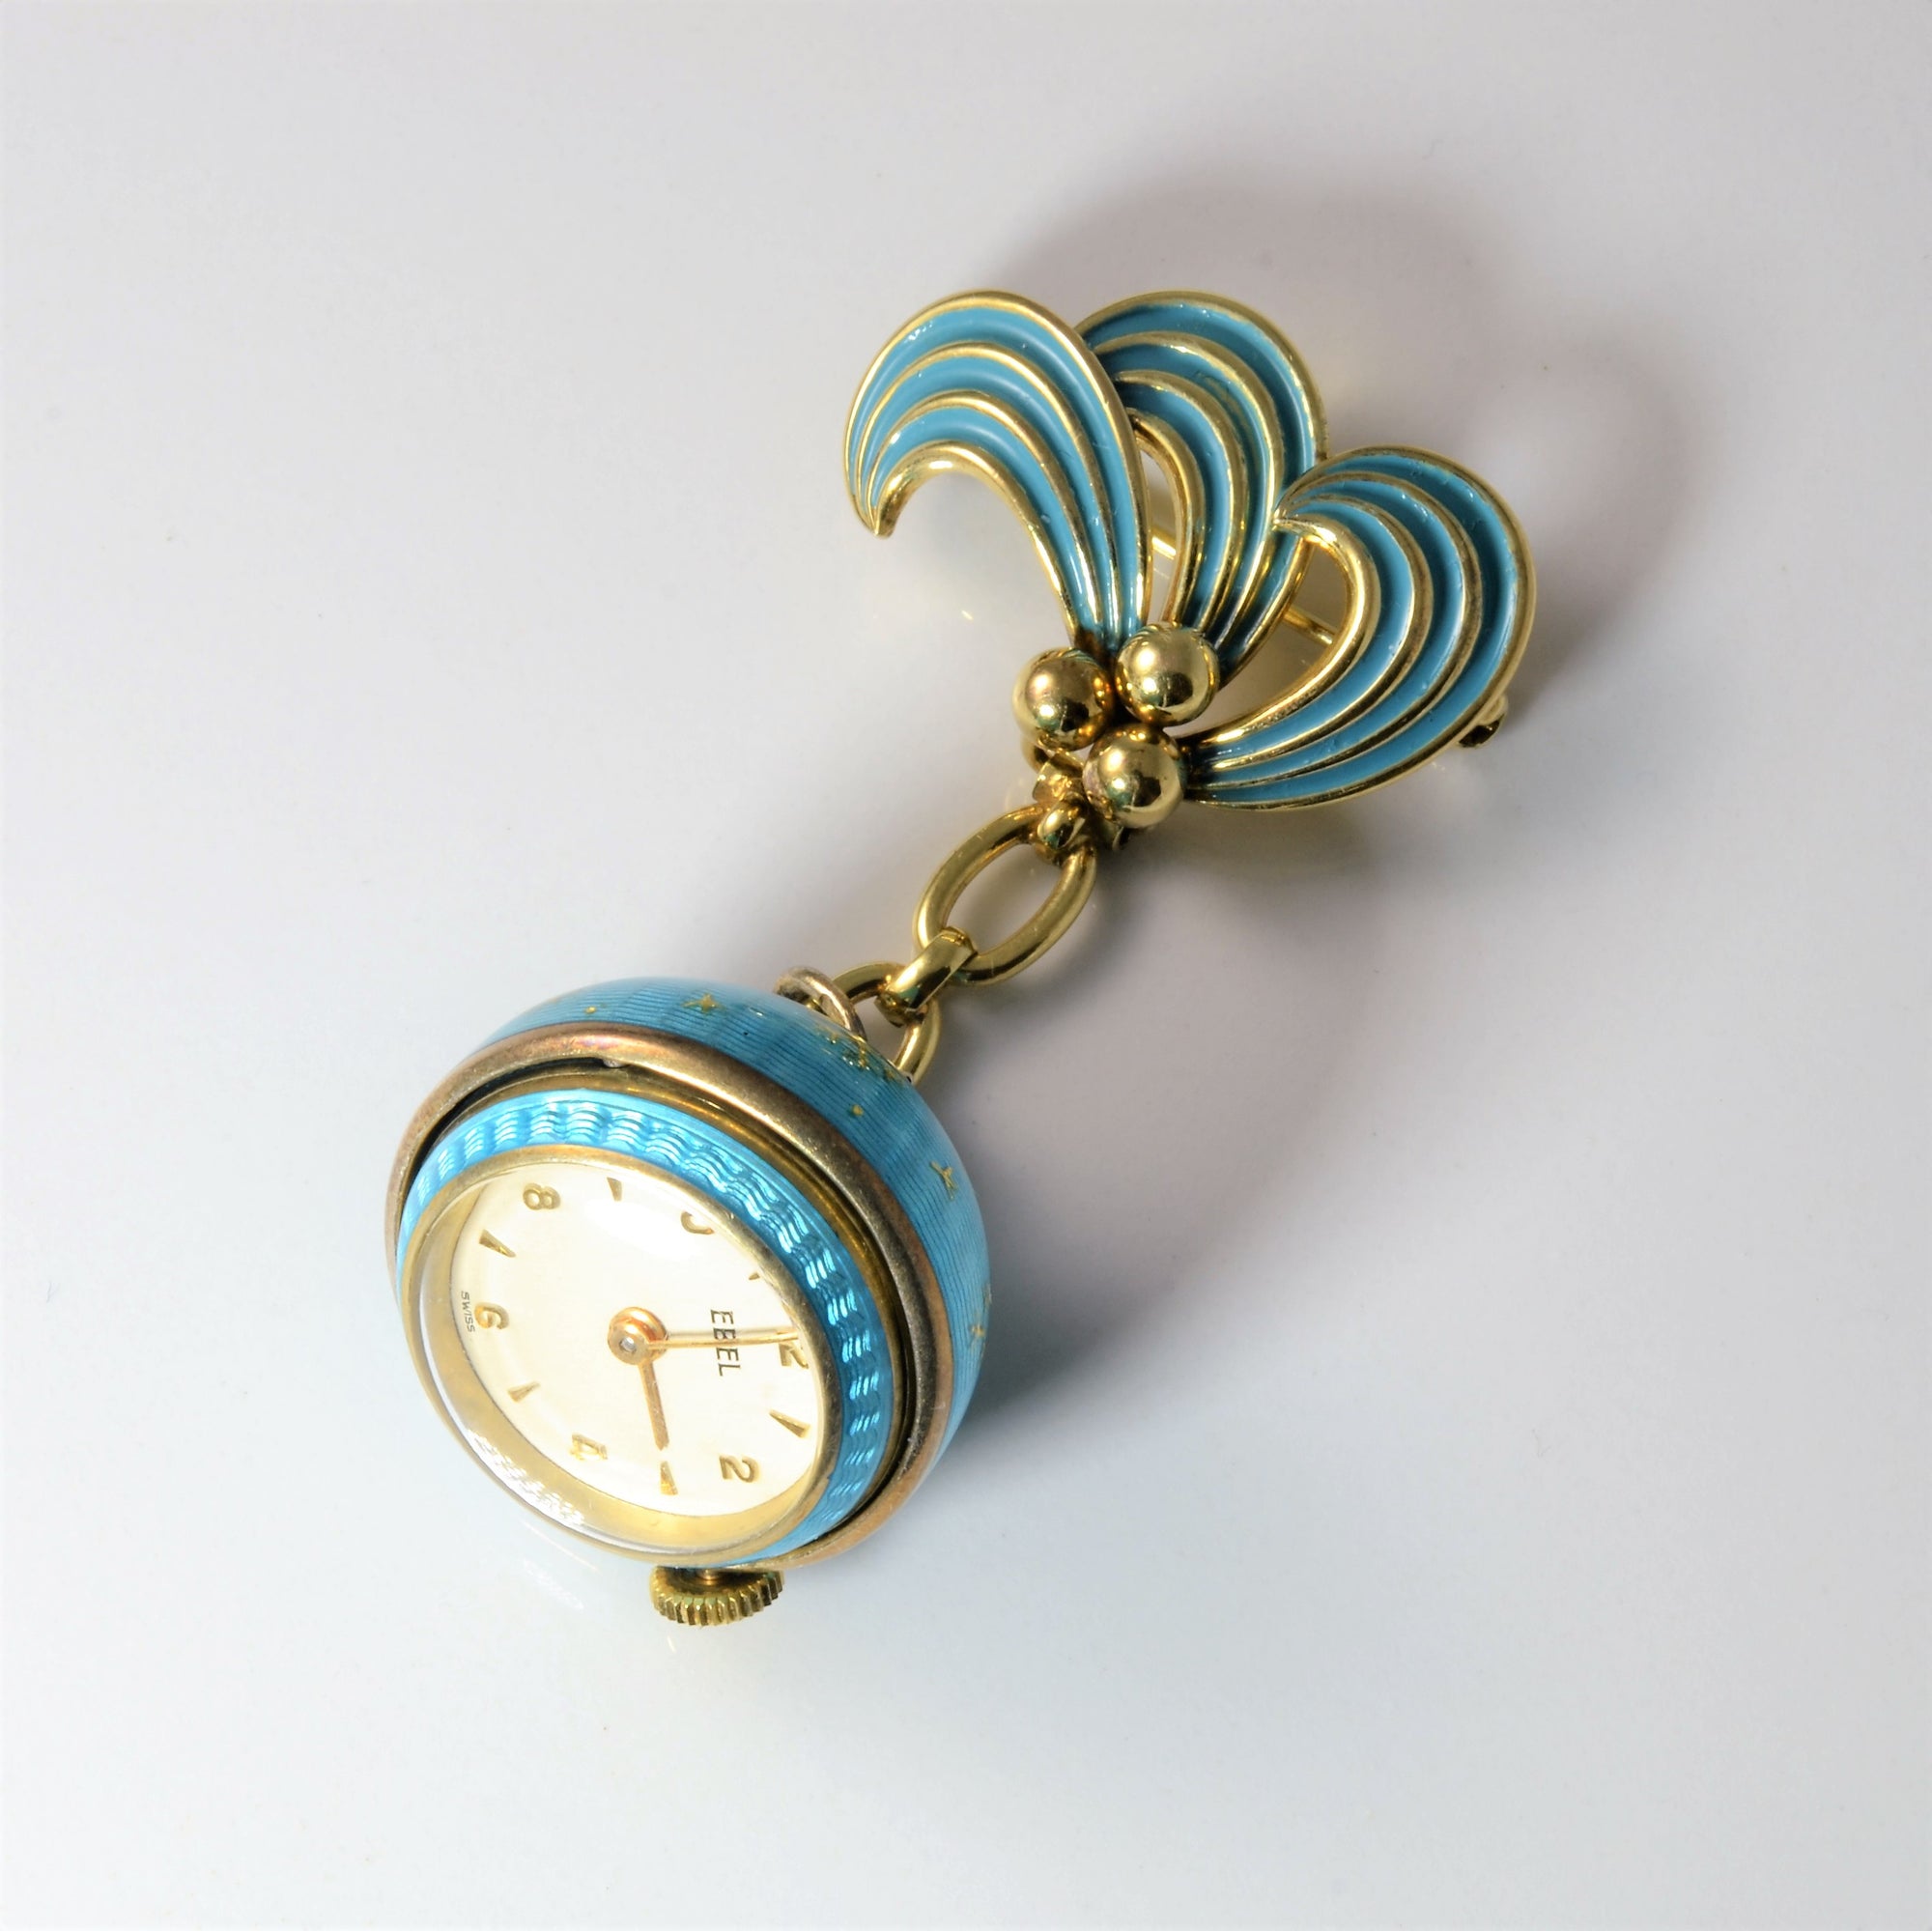 Beautiful Brooch with watch, blue, antique broach, vintage jewelry brooch, vintage brooch canada, antique brooch usa